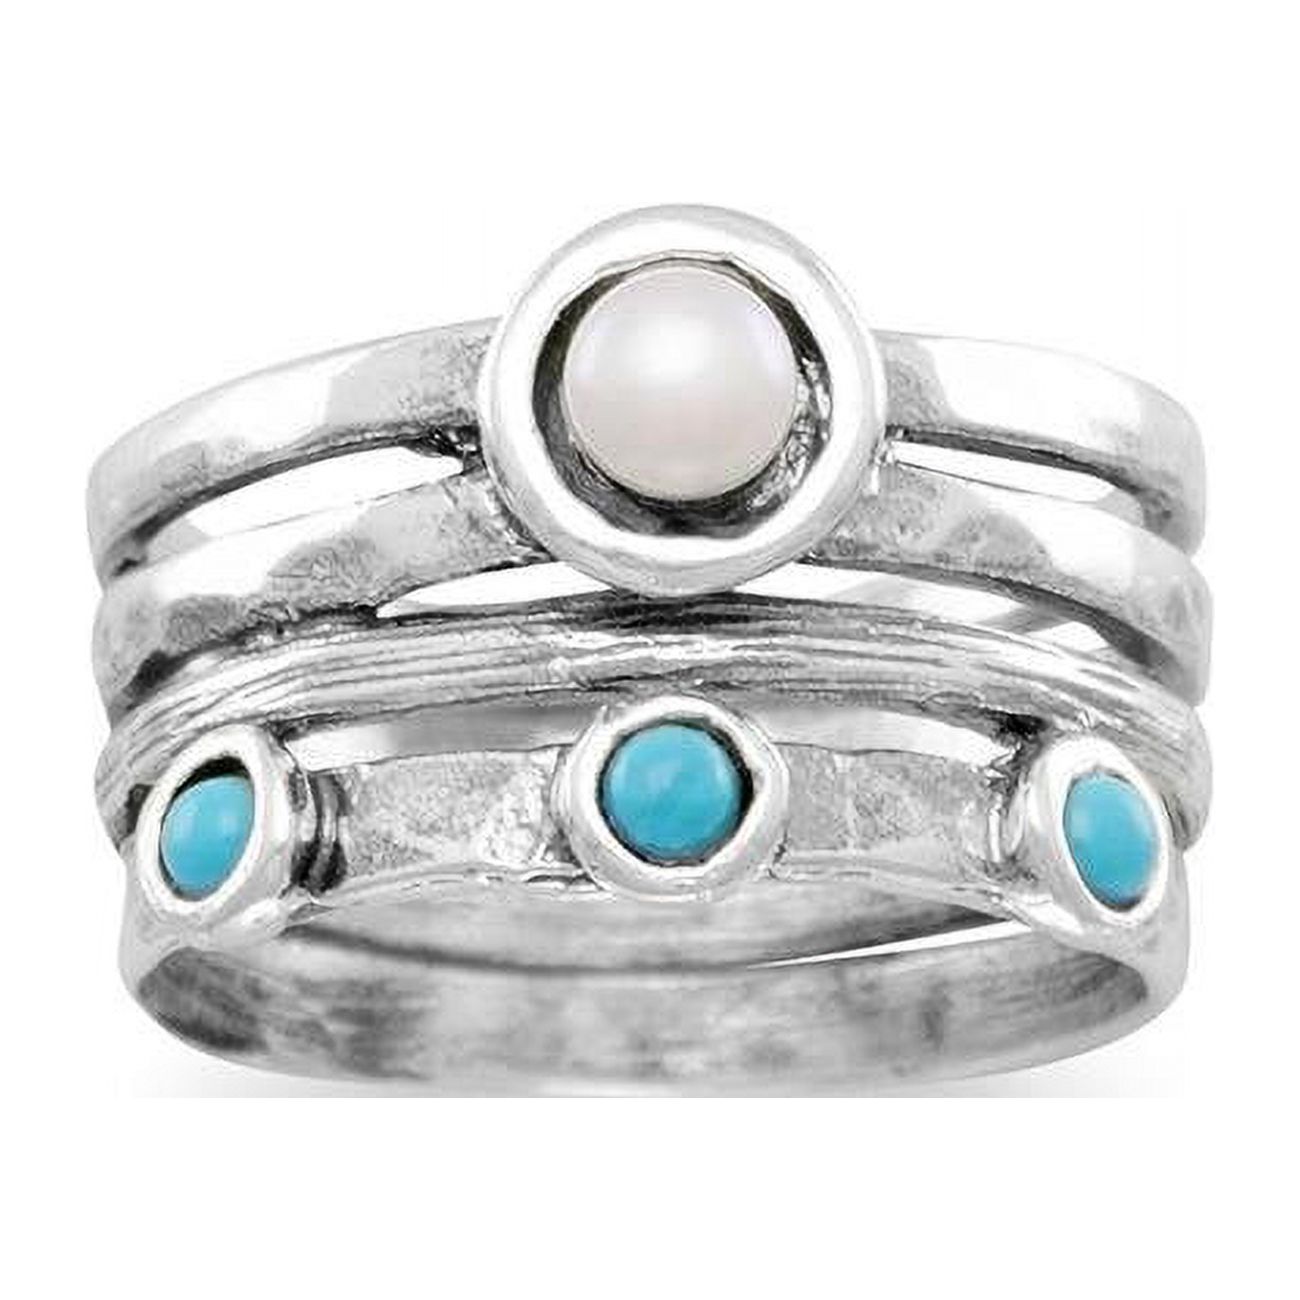 Precious Stars 83147-6 Sterling Silver Reconstituted & Cultured Pearl Multi-Band Ring - Size 6 - image 1 of 1